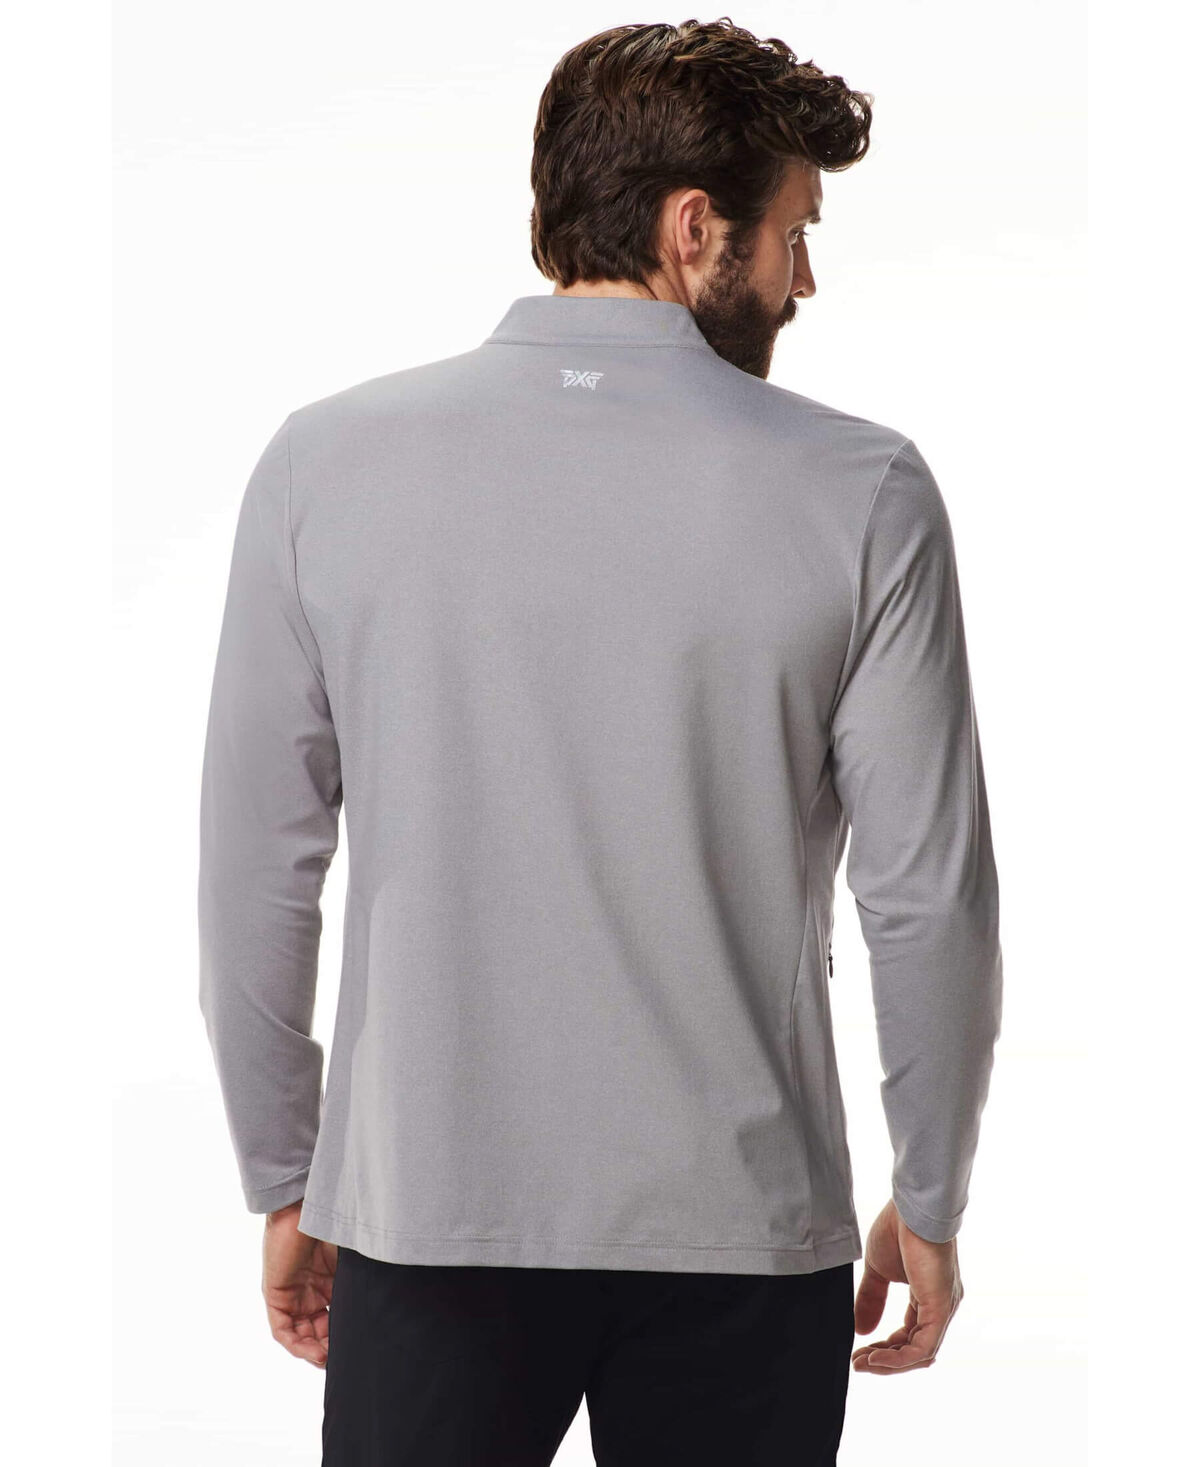 Flow Performance 1/4 Zip Pullover - Heather Charcoal